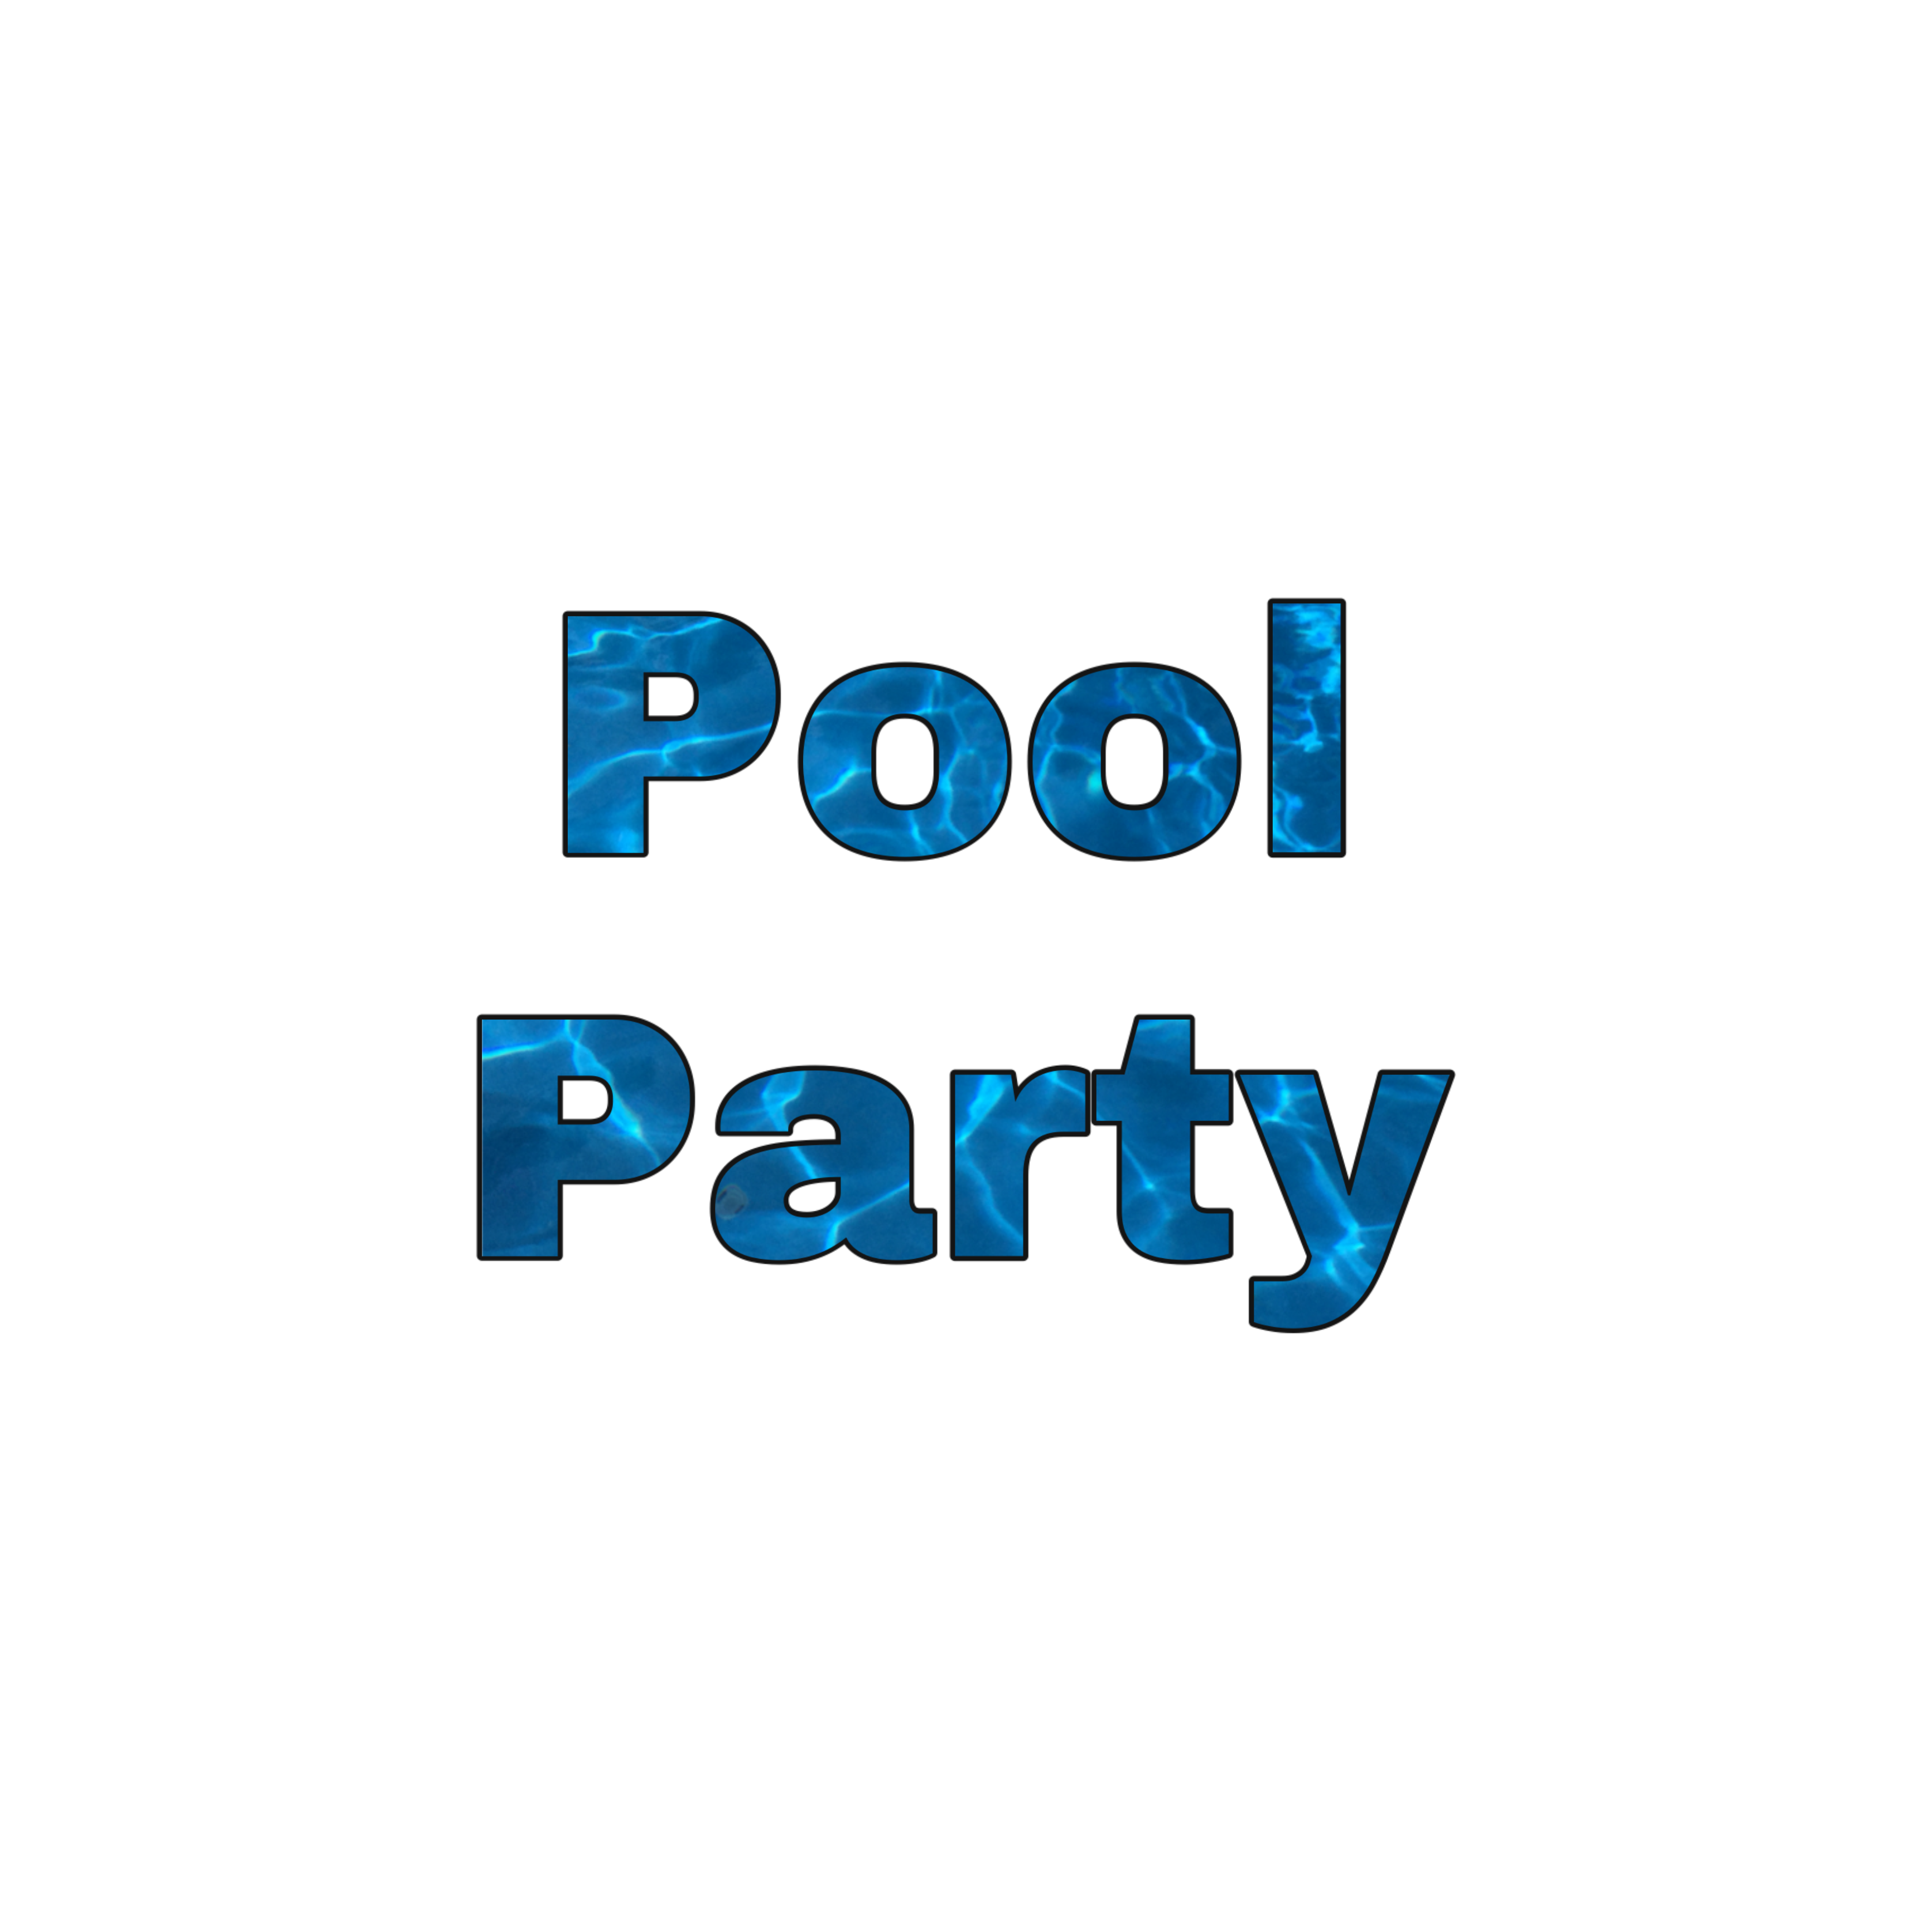 poolparty pool water party text message sticker by @fractorz